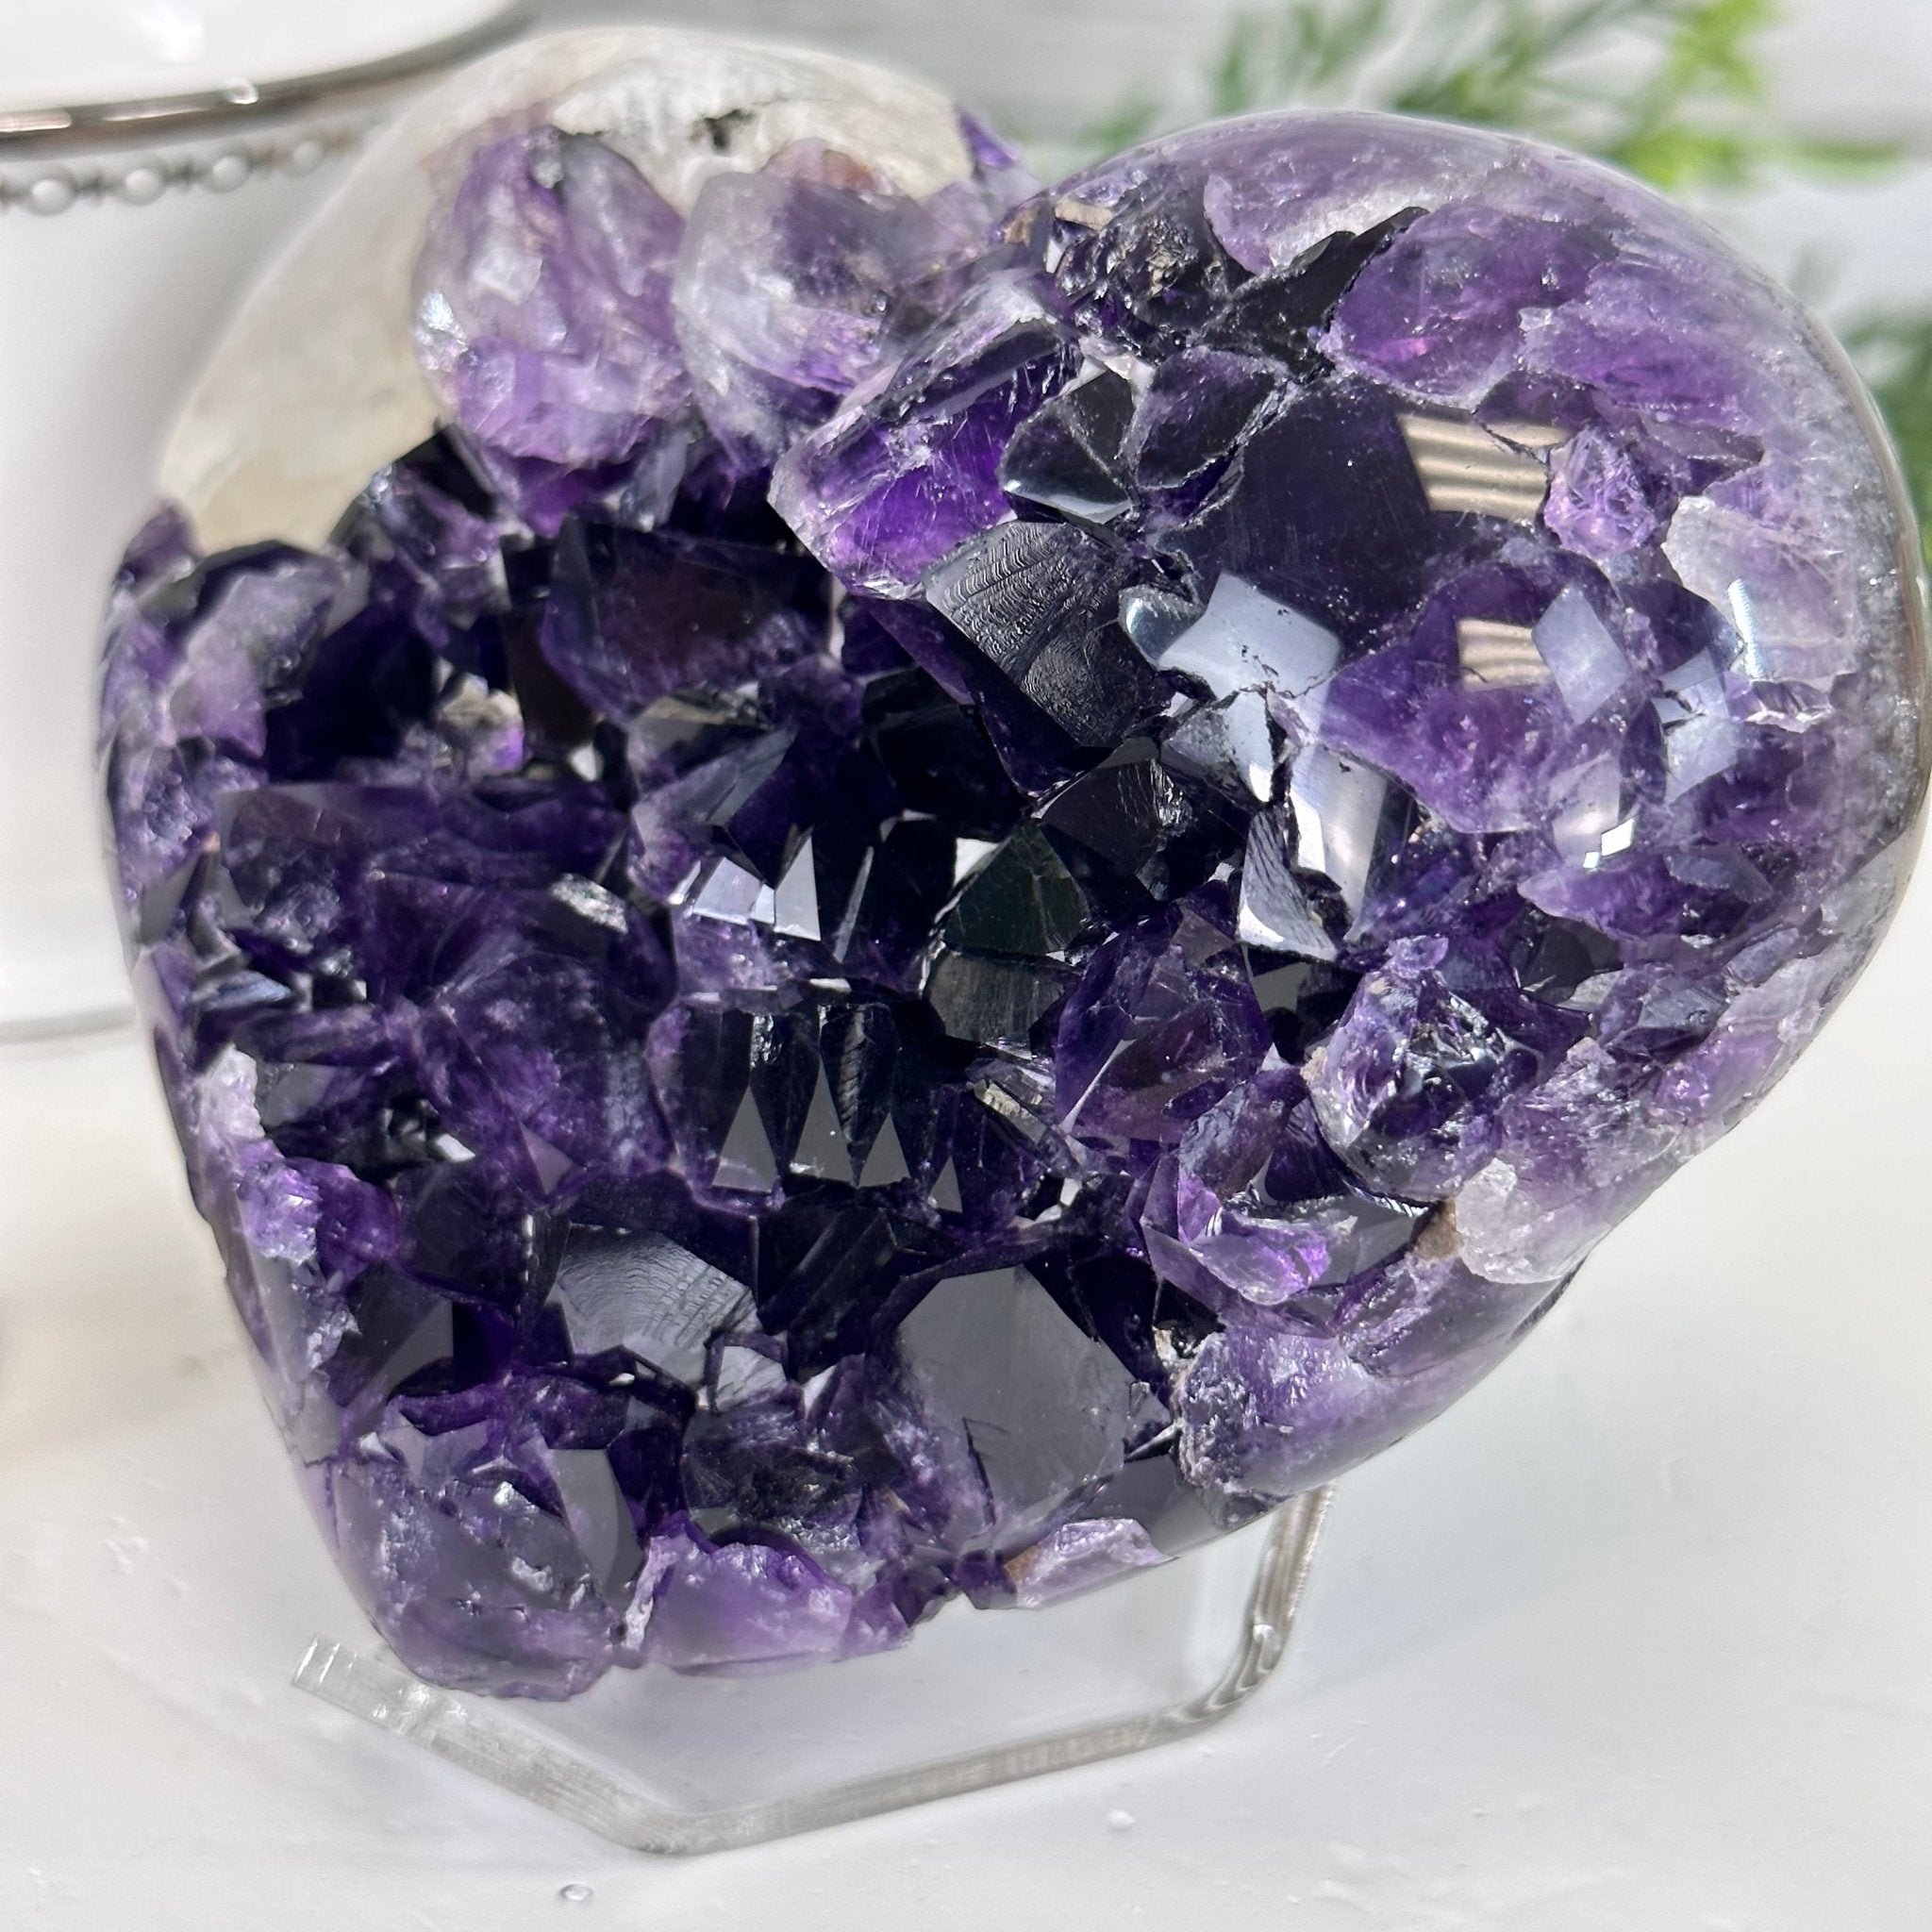 Super Quality Amethyst Heart Geode on an Acrylic Stand, 1.71 lbs & 3.4" Tall #5462-0064 by Brazil Gems - Brazil GemsBrazil GemsSuper Quality Amethyst Heart Geode on an Acrylic Stand, 1.71 lbs & 3.4" Tall #5462-0064 by Brazil GemsHearts5462-0064